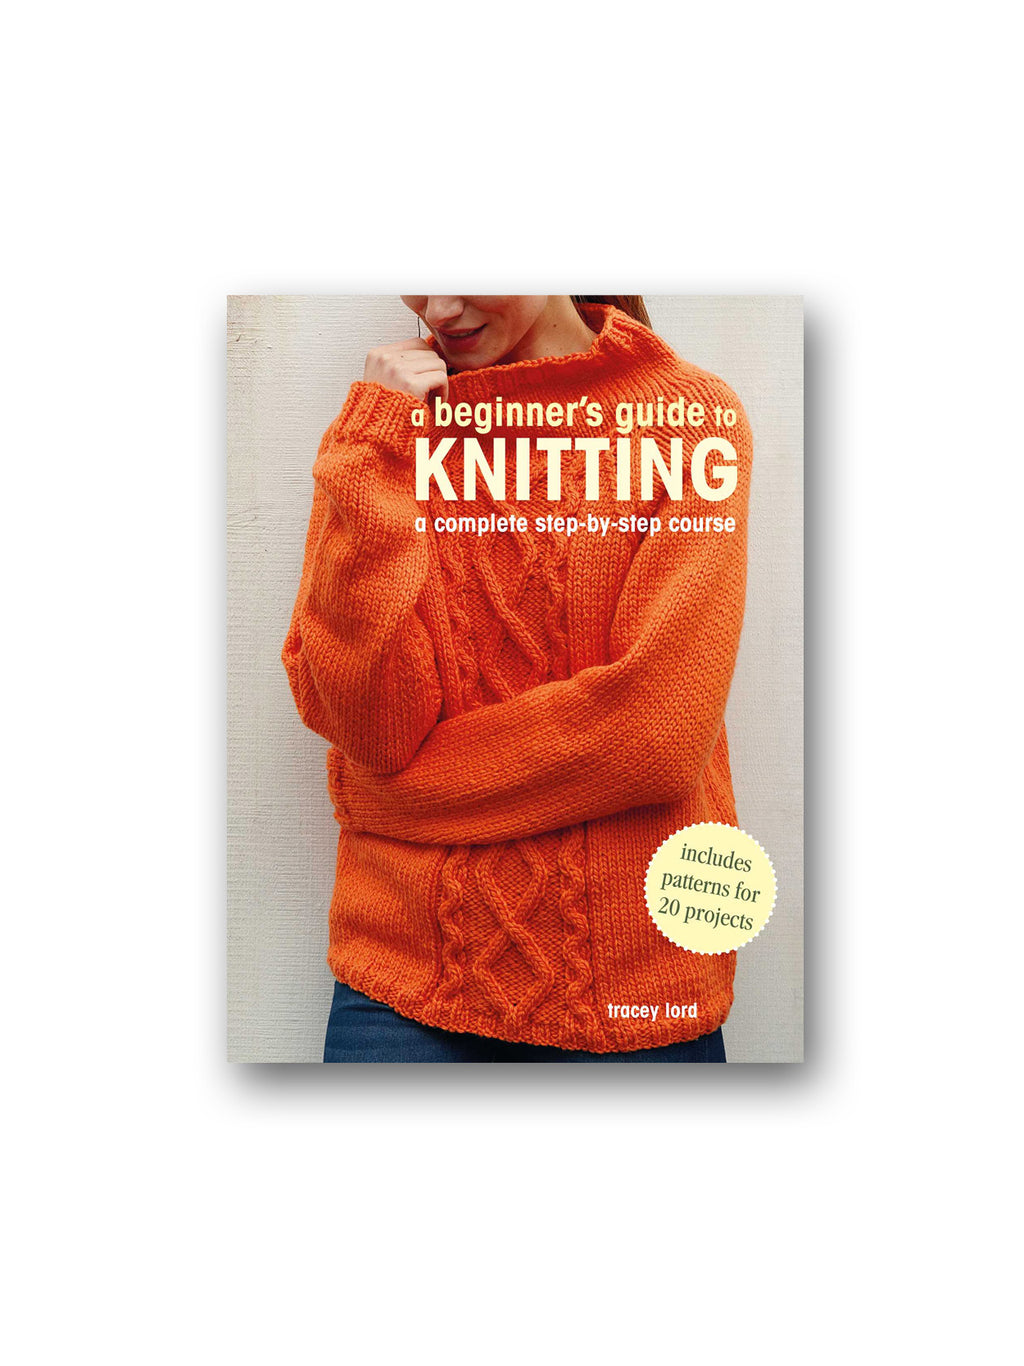 A Beginner's Guide to Knitting